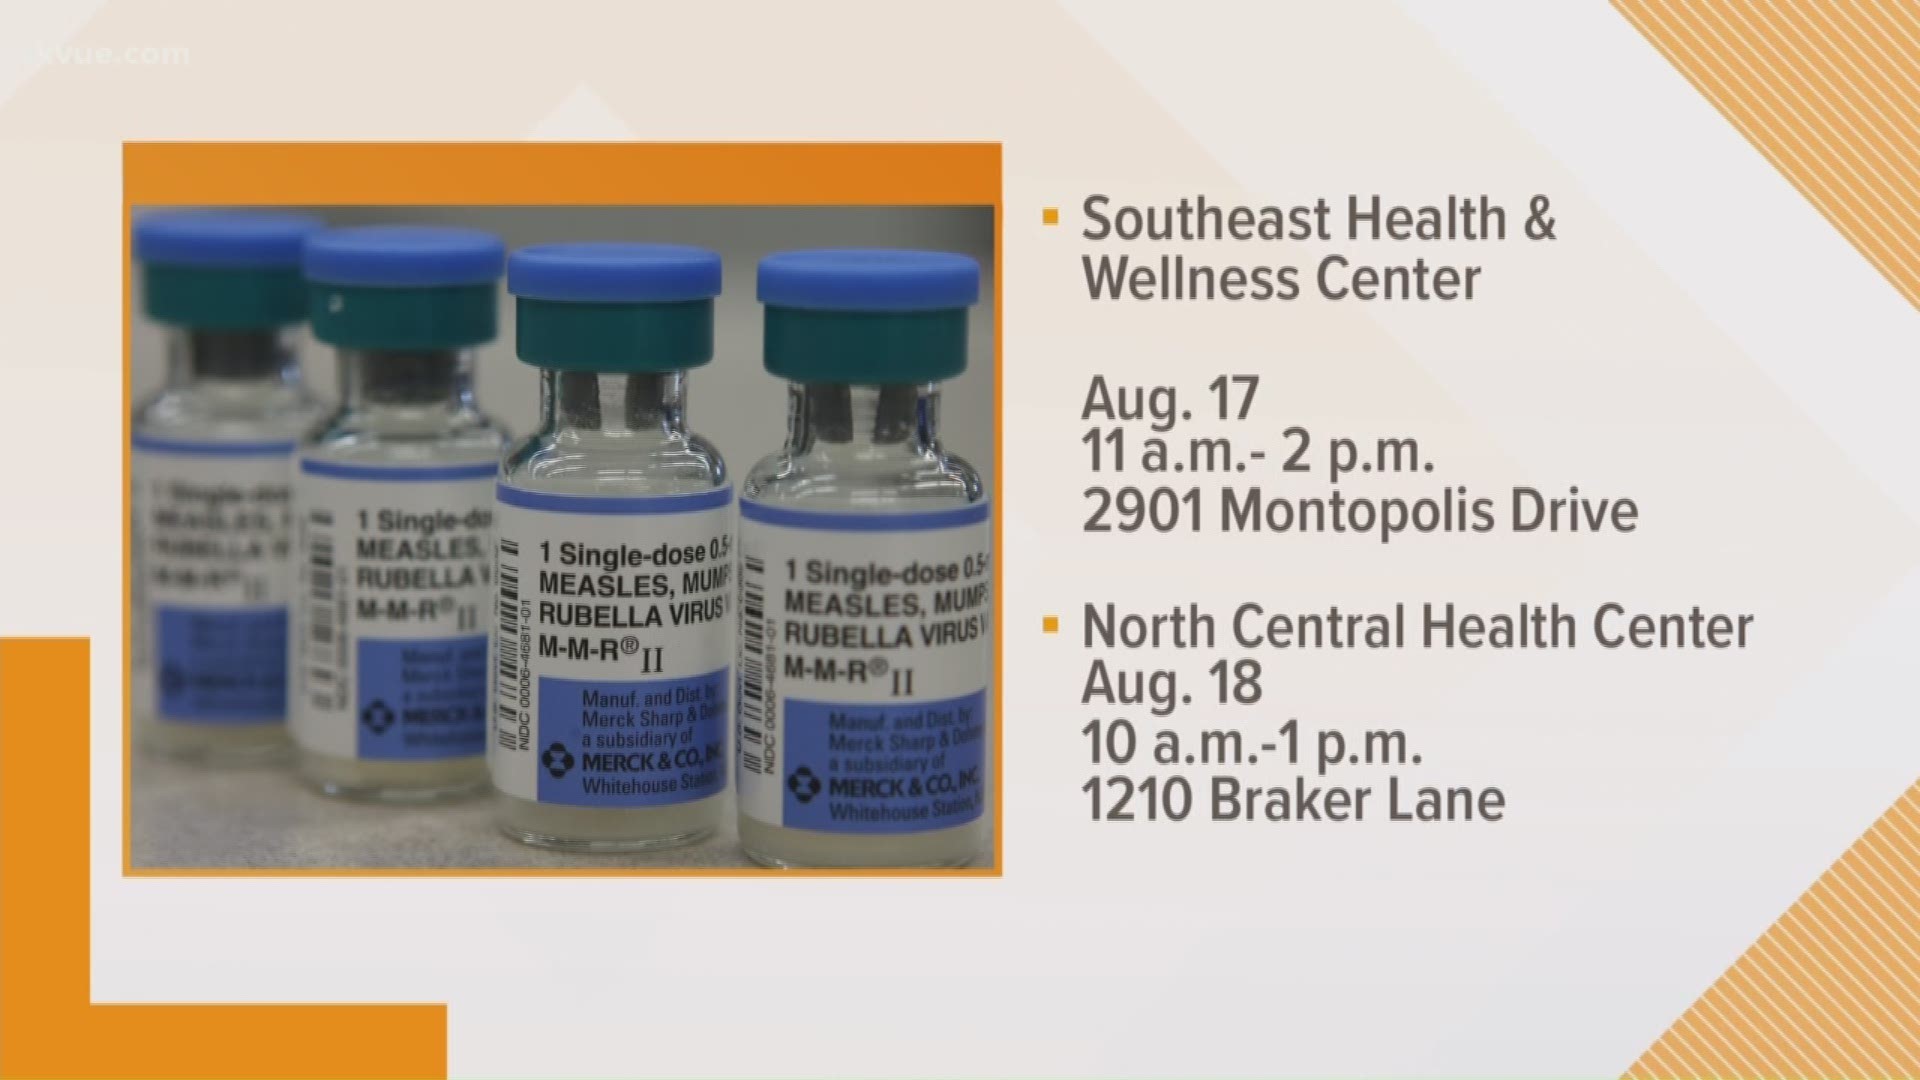 Free back-to-school vaccines in Austin